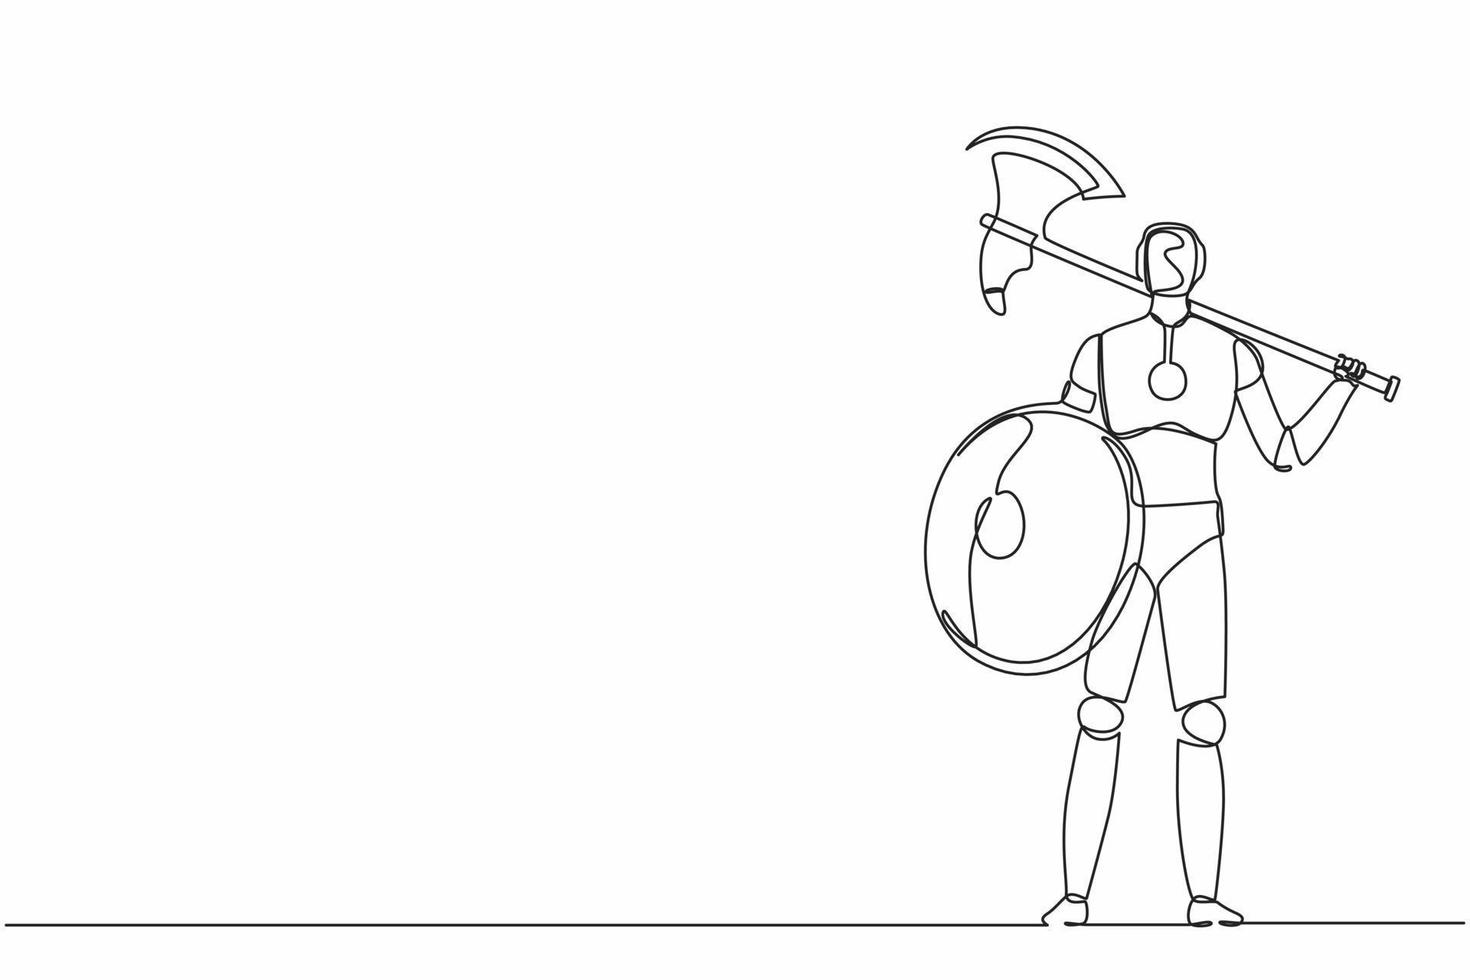 Single one line drawing robot standing holding axe and shield. Future technology development. Artificial intelligence machine learning process. Continuous line draw design graphic vector illustration